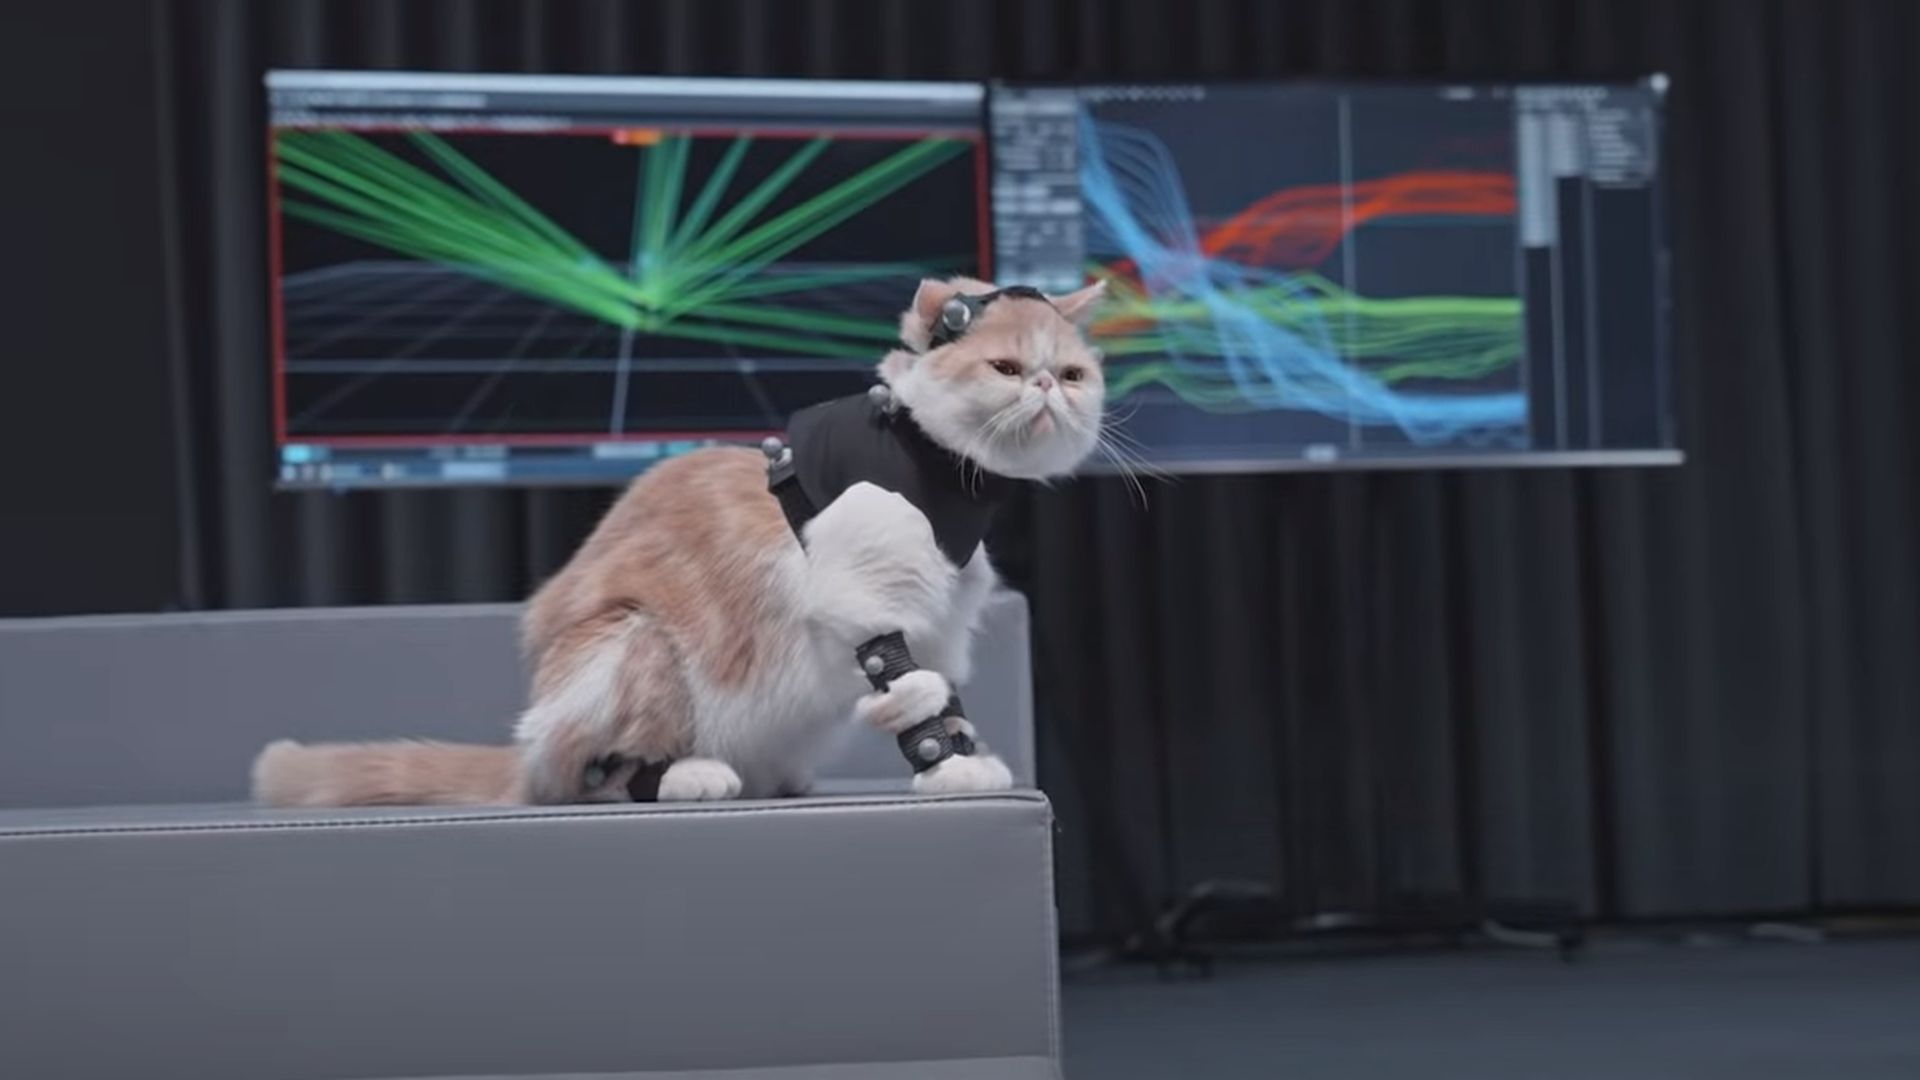 Here's a very silly look at Black Myth: Wukong's mocap tech, with cats